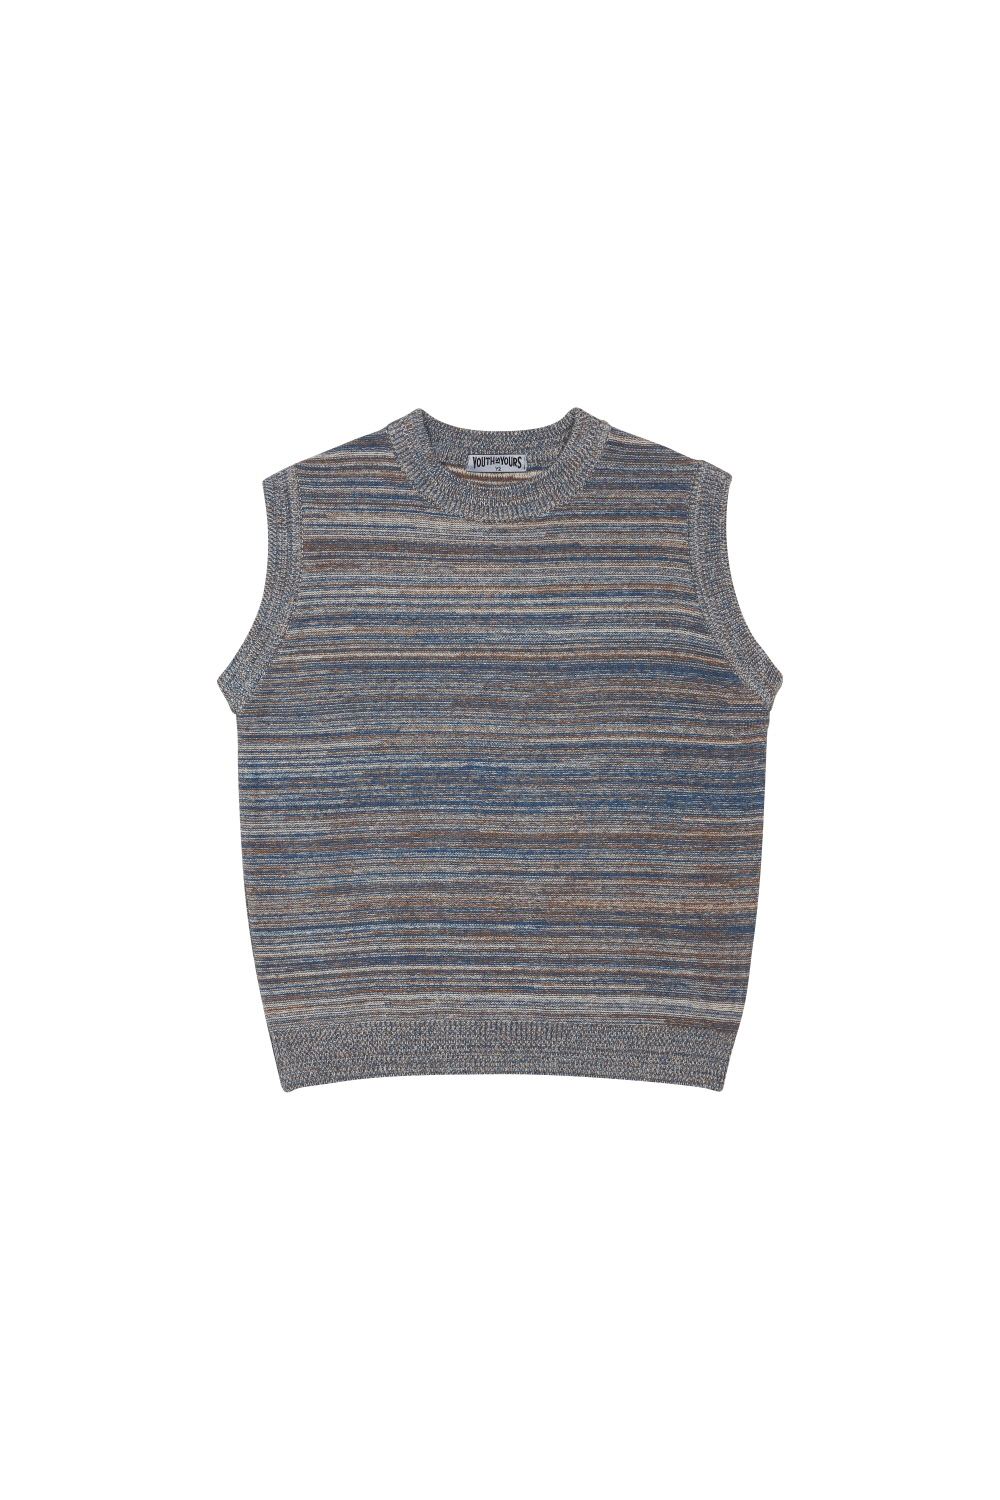 sleeveless charcoal color image-S19L3